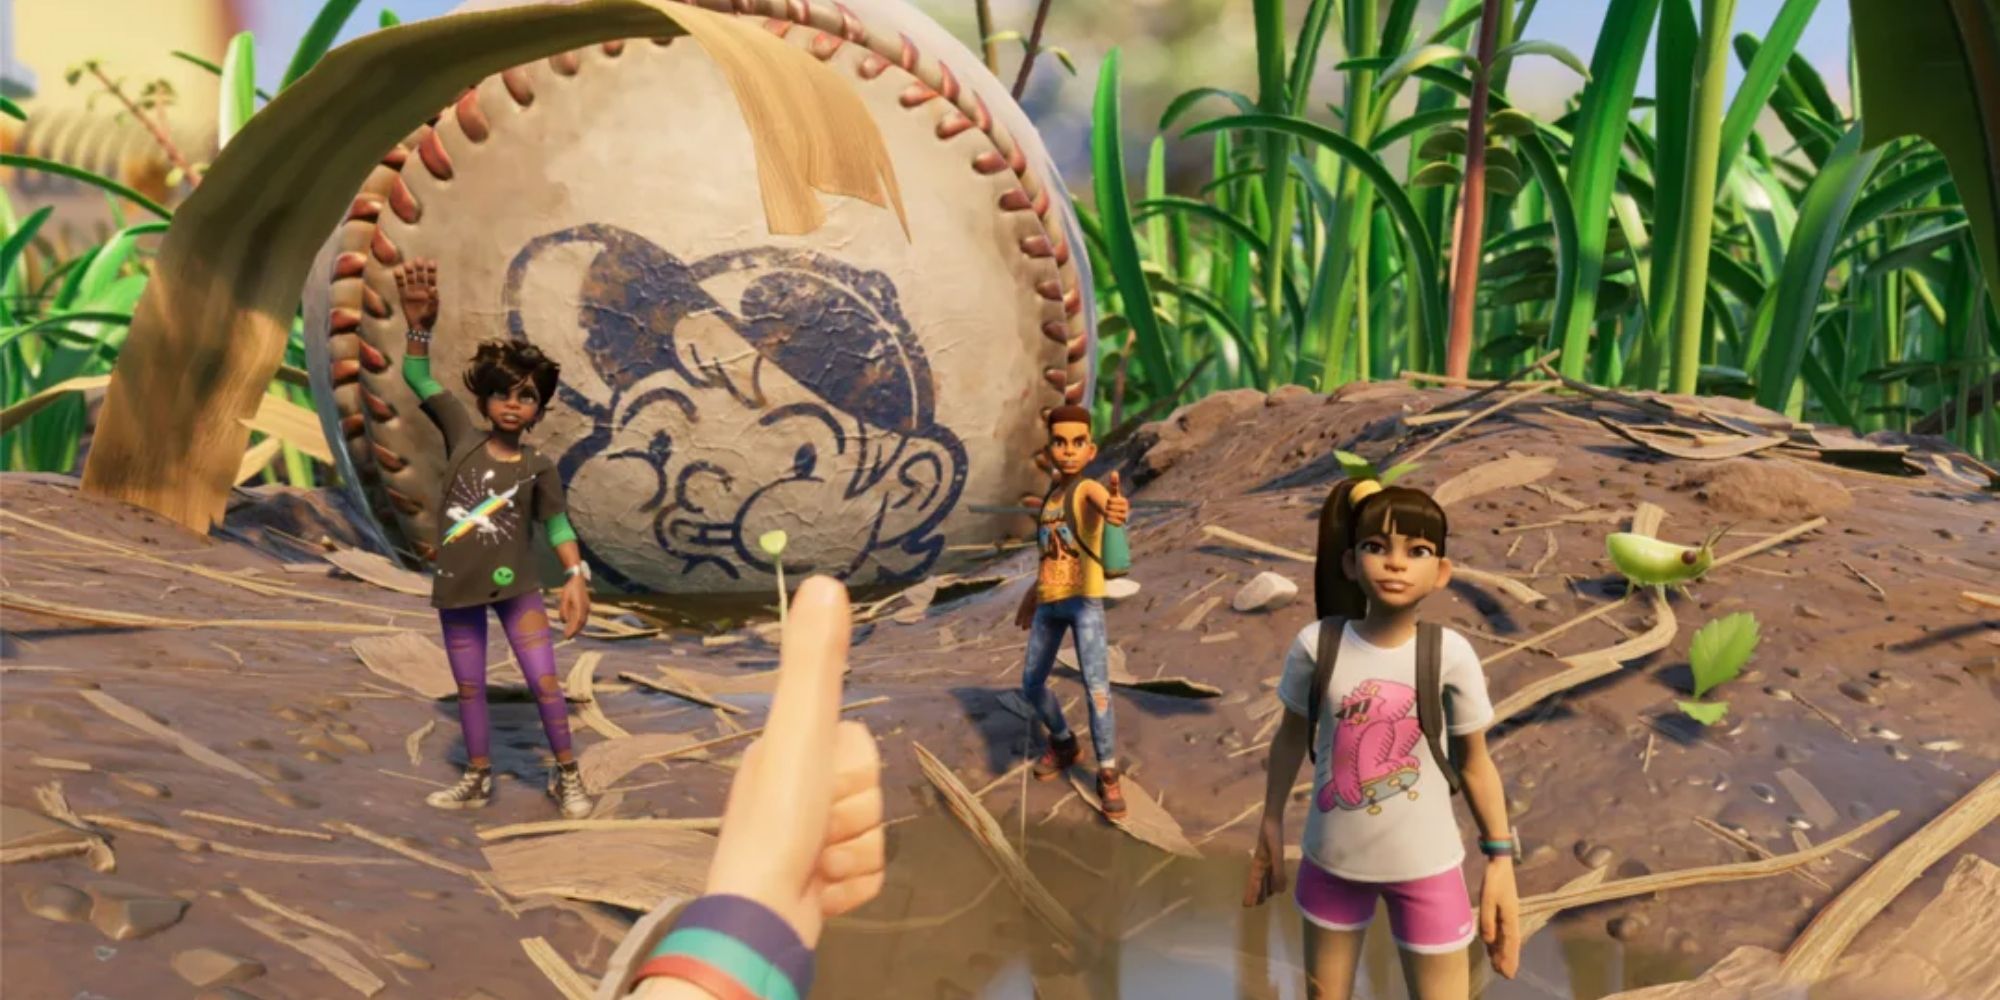 The player giving three other players a thumbs up with the baseball behind them